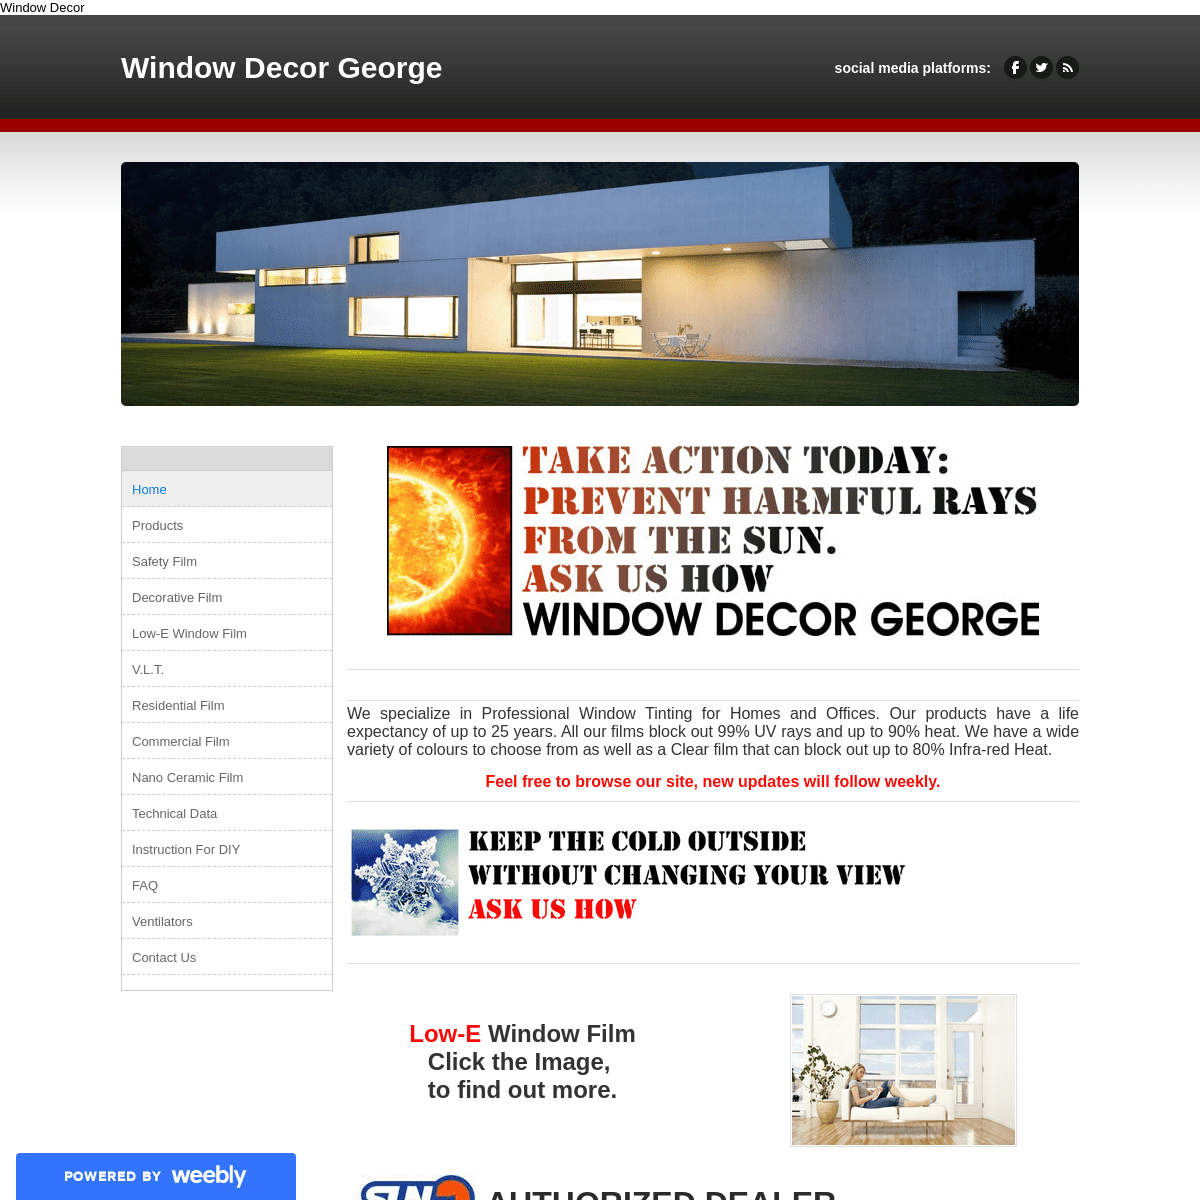 A complete backup of https://windowdecorgeorge.weebly.com/